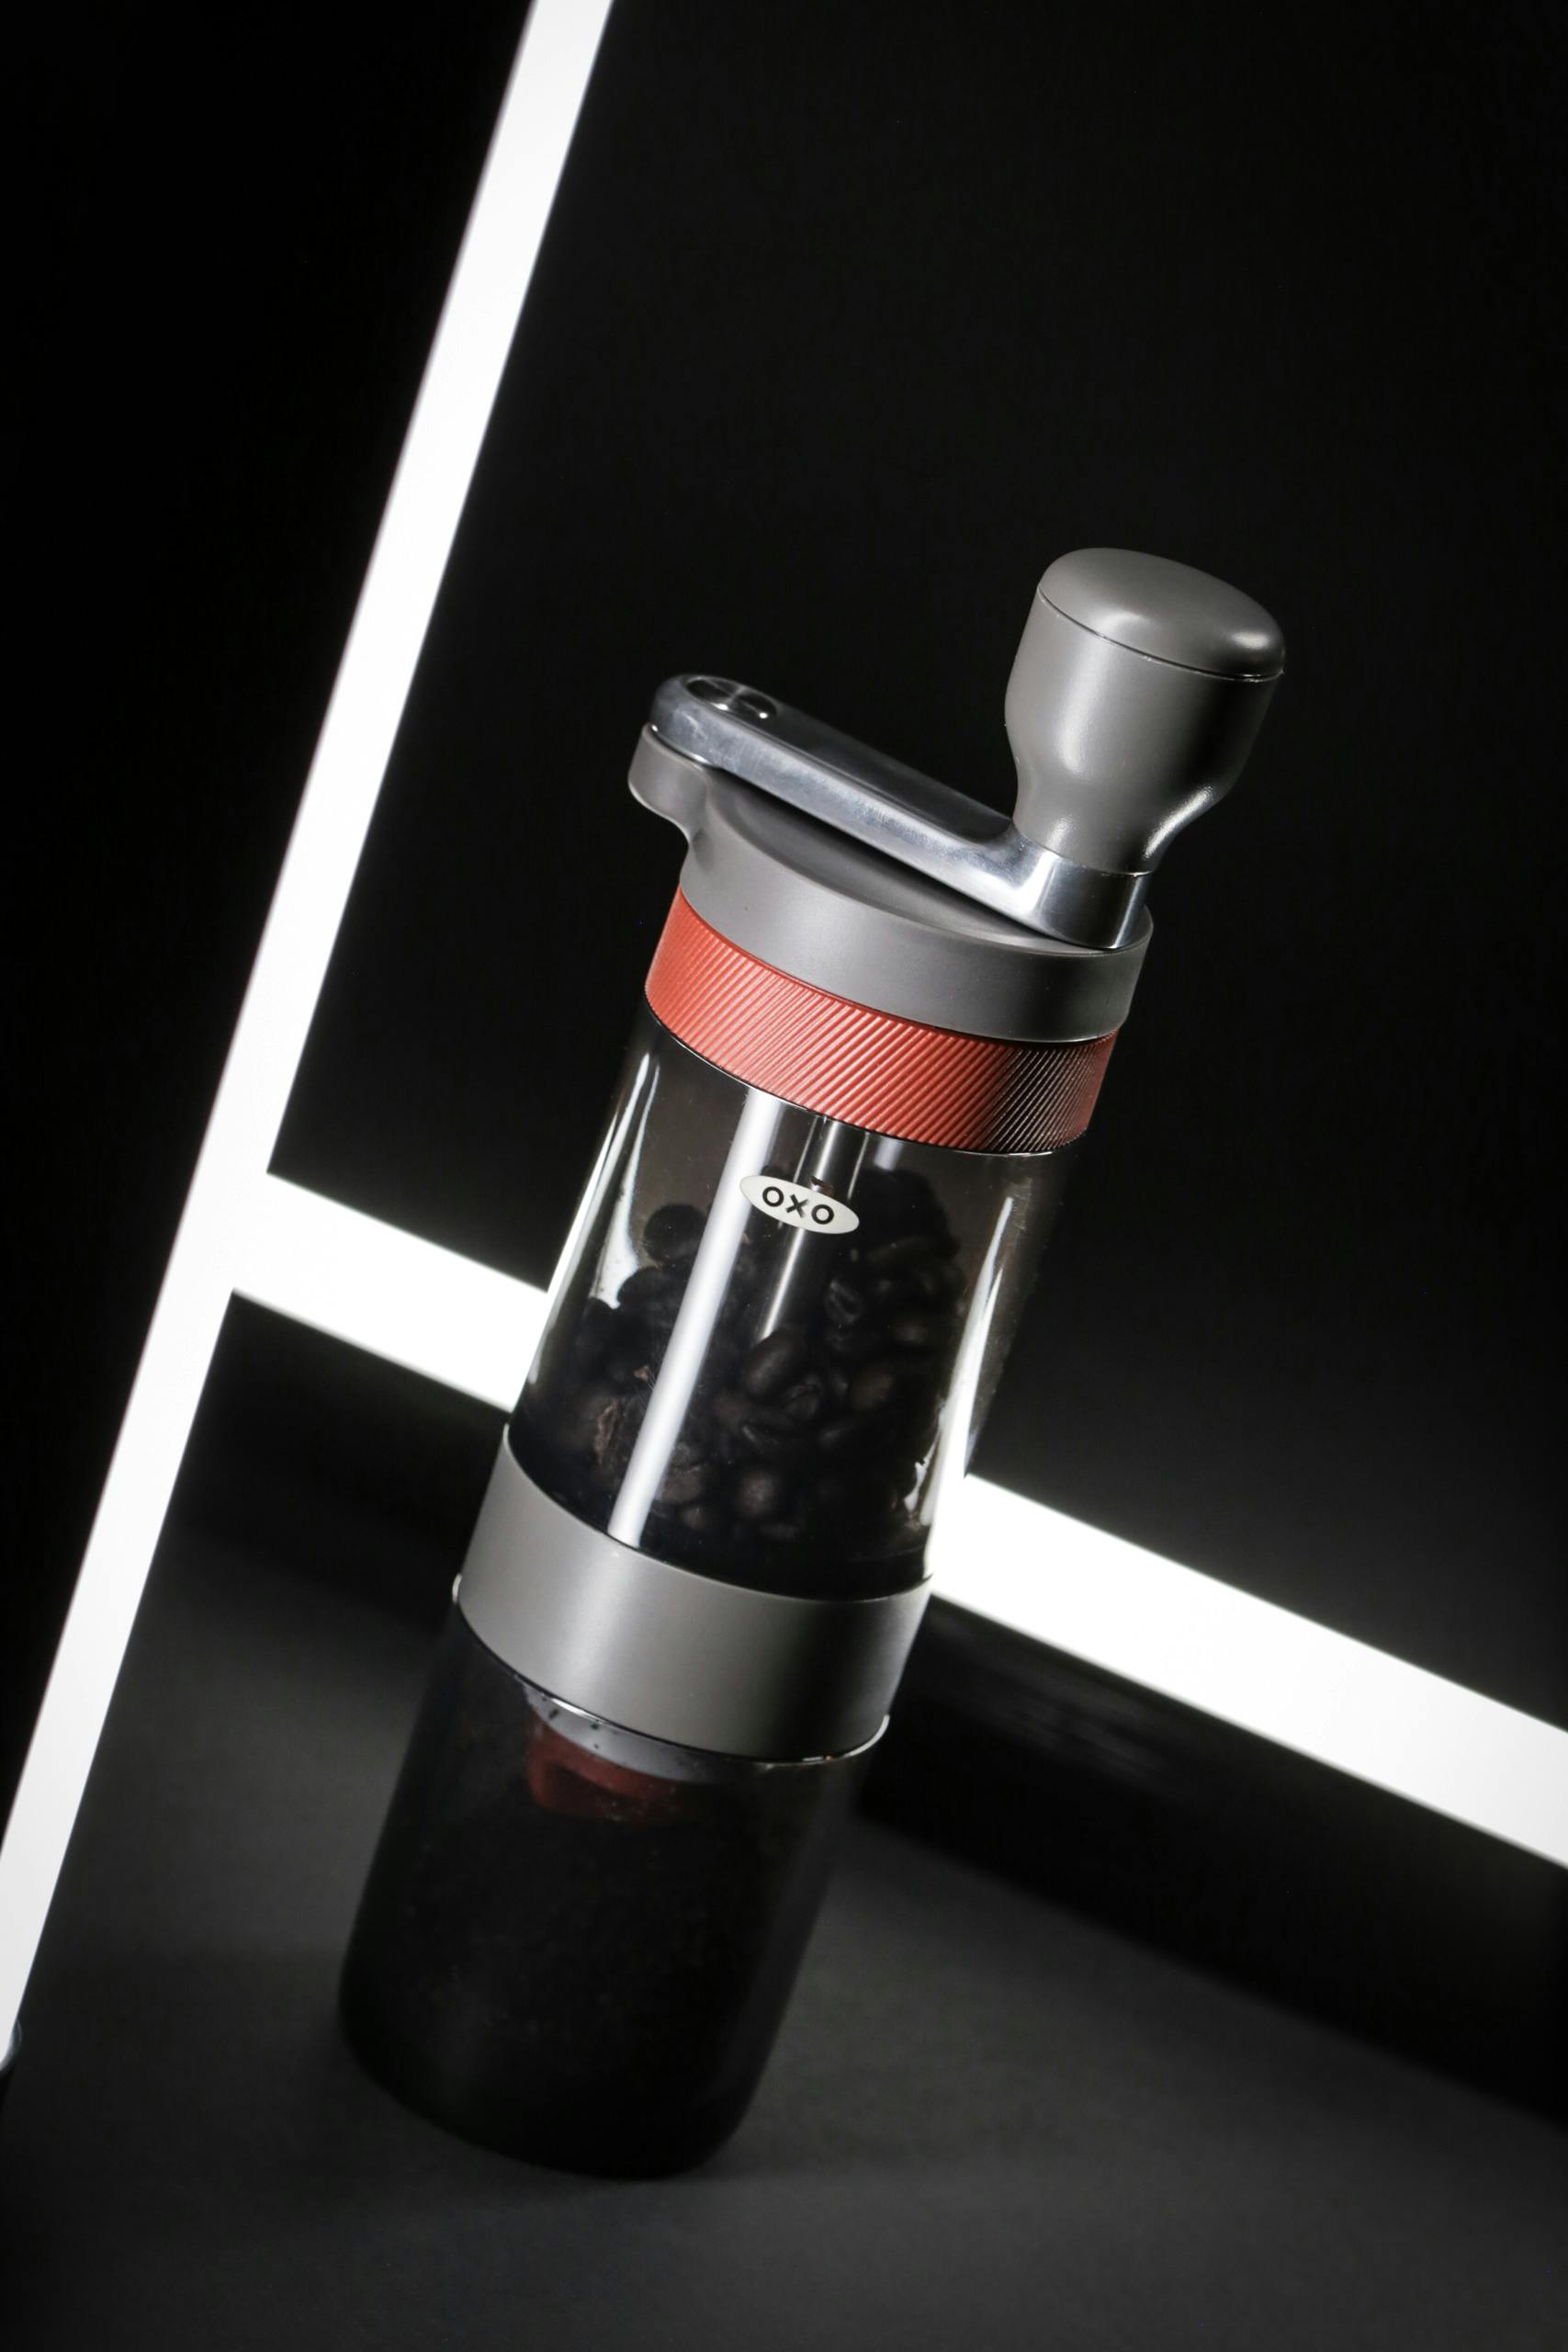 OXO coffee grinder